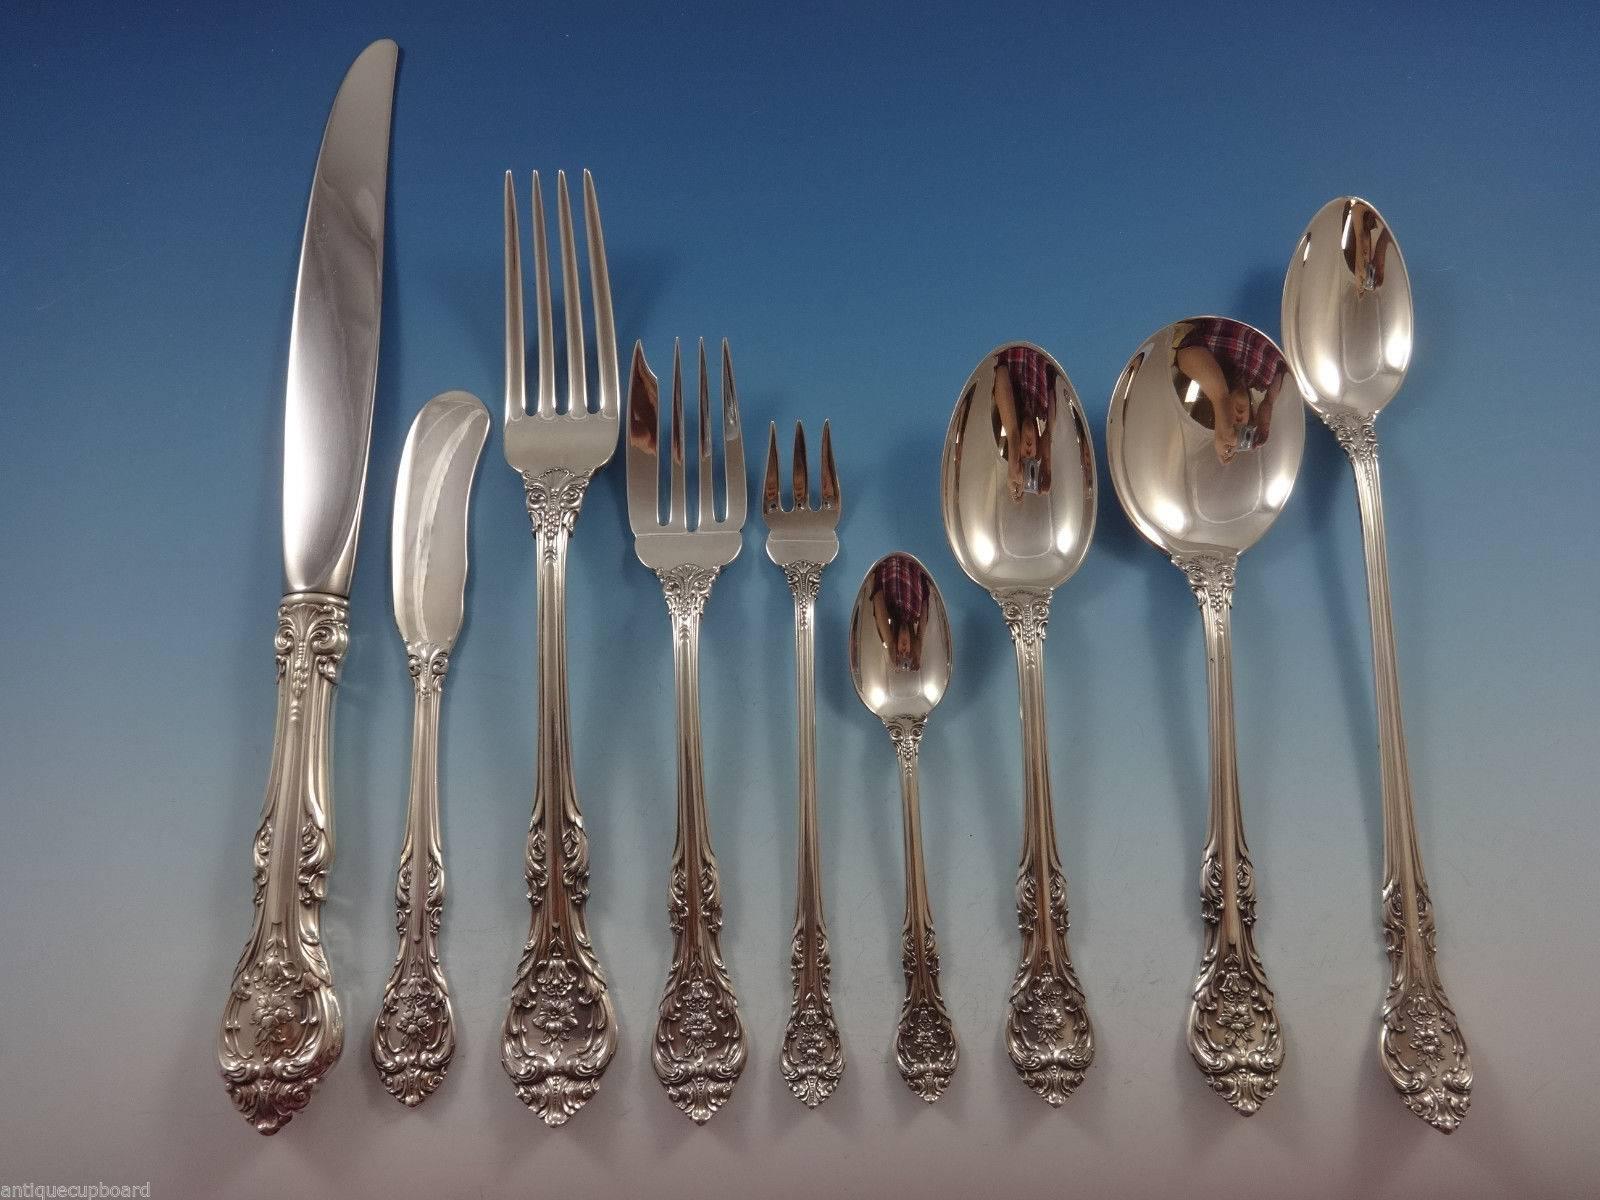 The King Edward pattern lends a regal flair to your table décor. Intricately sculpted handles reflect superior Gorham design and craftsmanship.

WONDERFUL KING EDWARD BY GORHAM Sterling Silver DINNER SIZE flatware set - 120 pieces. This set